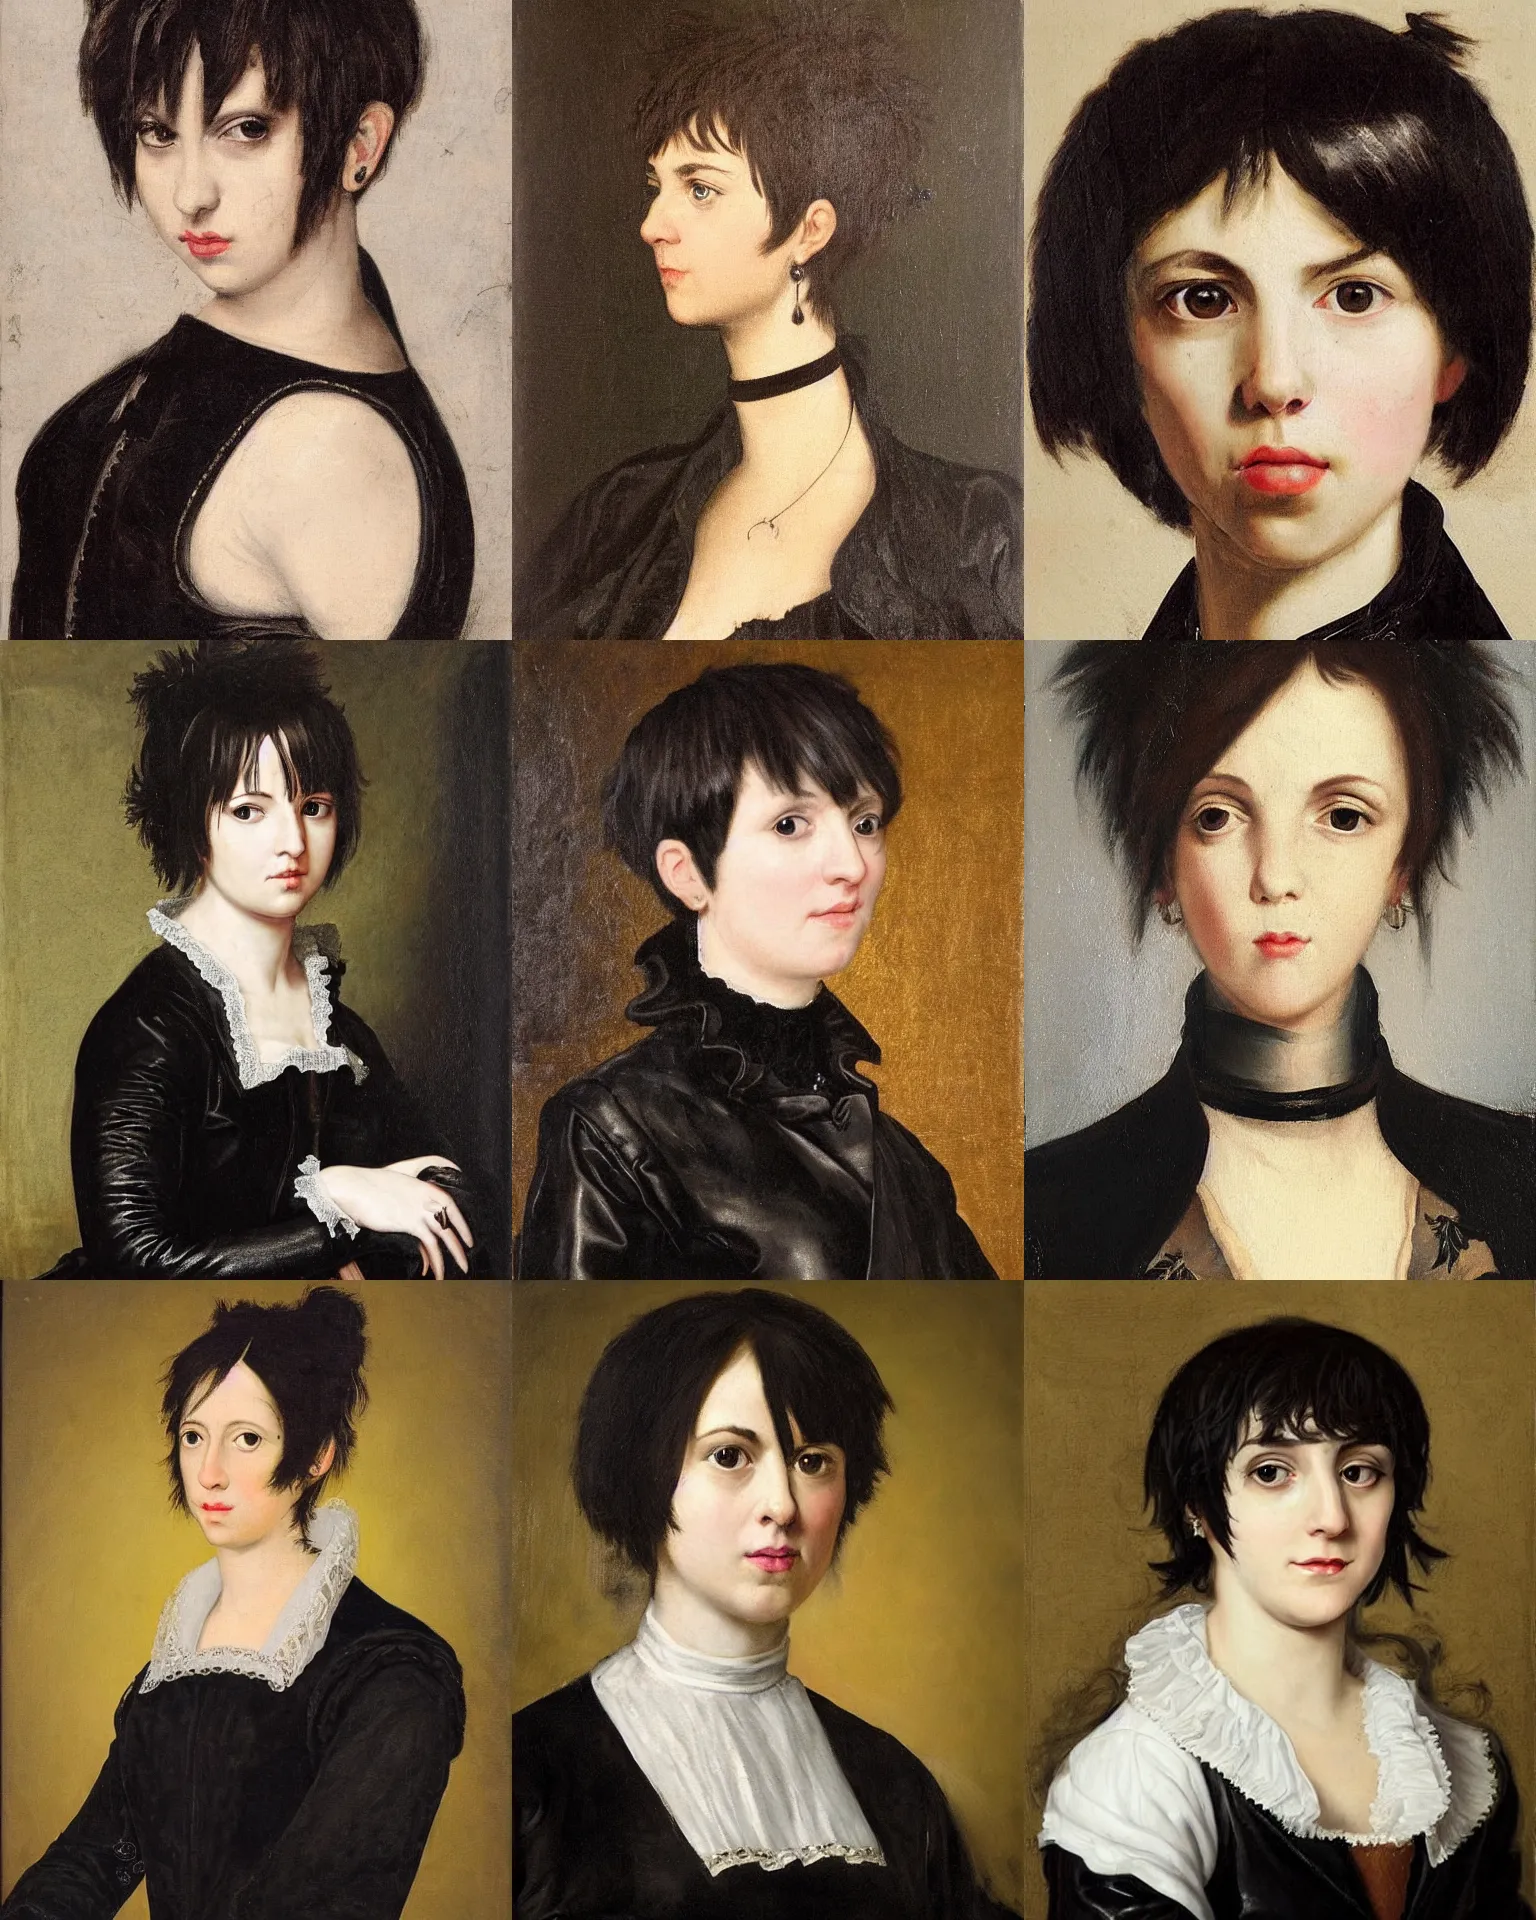 Prompt: A baroque portrait painting. Her hair is dark brown and cut into a short, messy pixie cut. She has a slightly rounded face, with a pointed chin, large entirely-black eyes, and a small nose. She is wearing a black leather jacket, a black knee-length skirt, a black choker, and black leather boots.